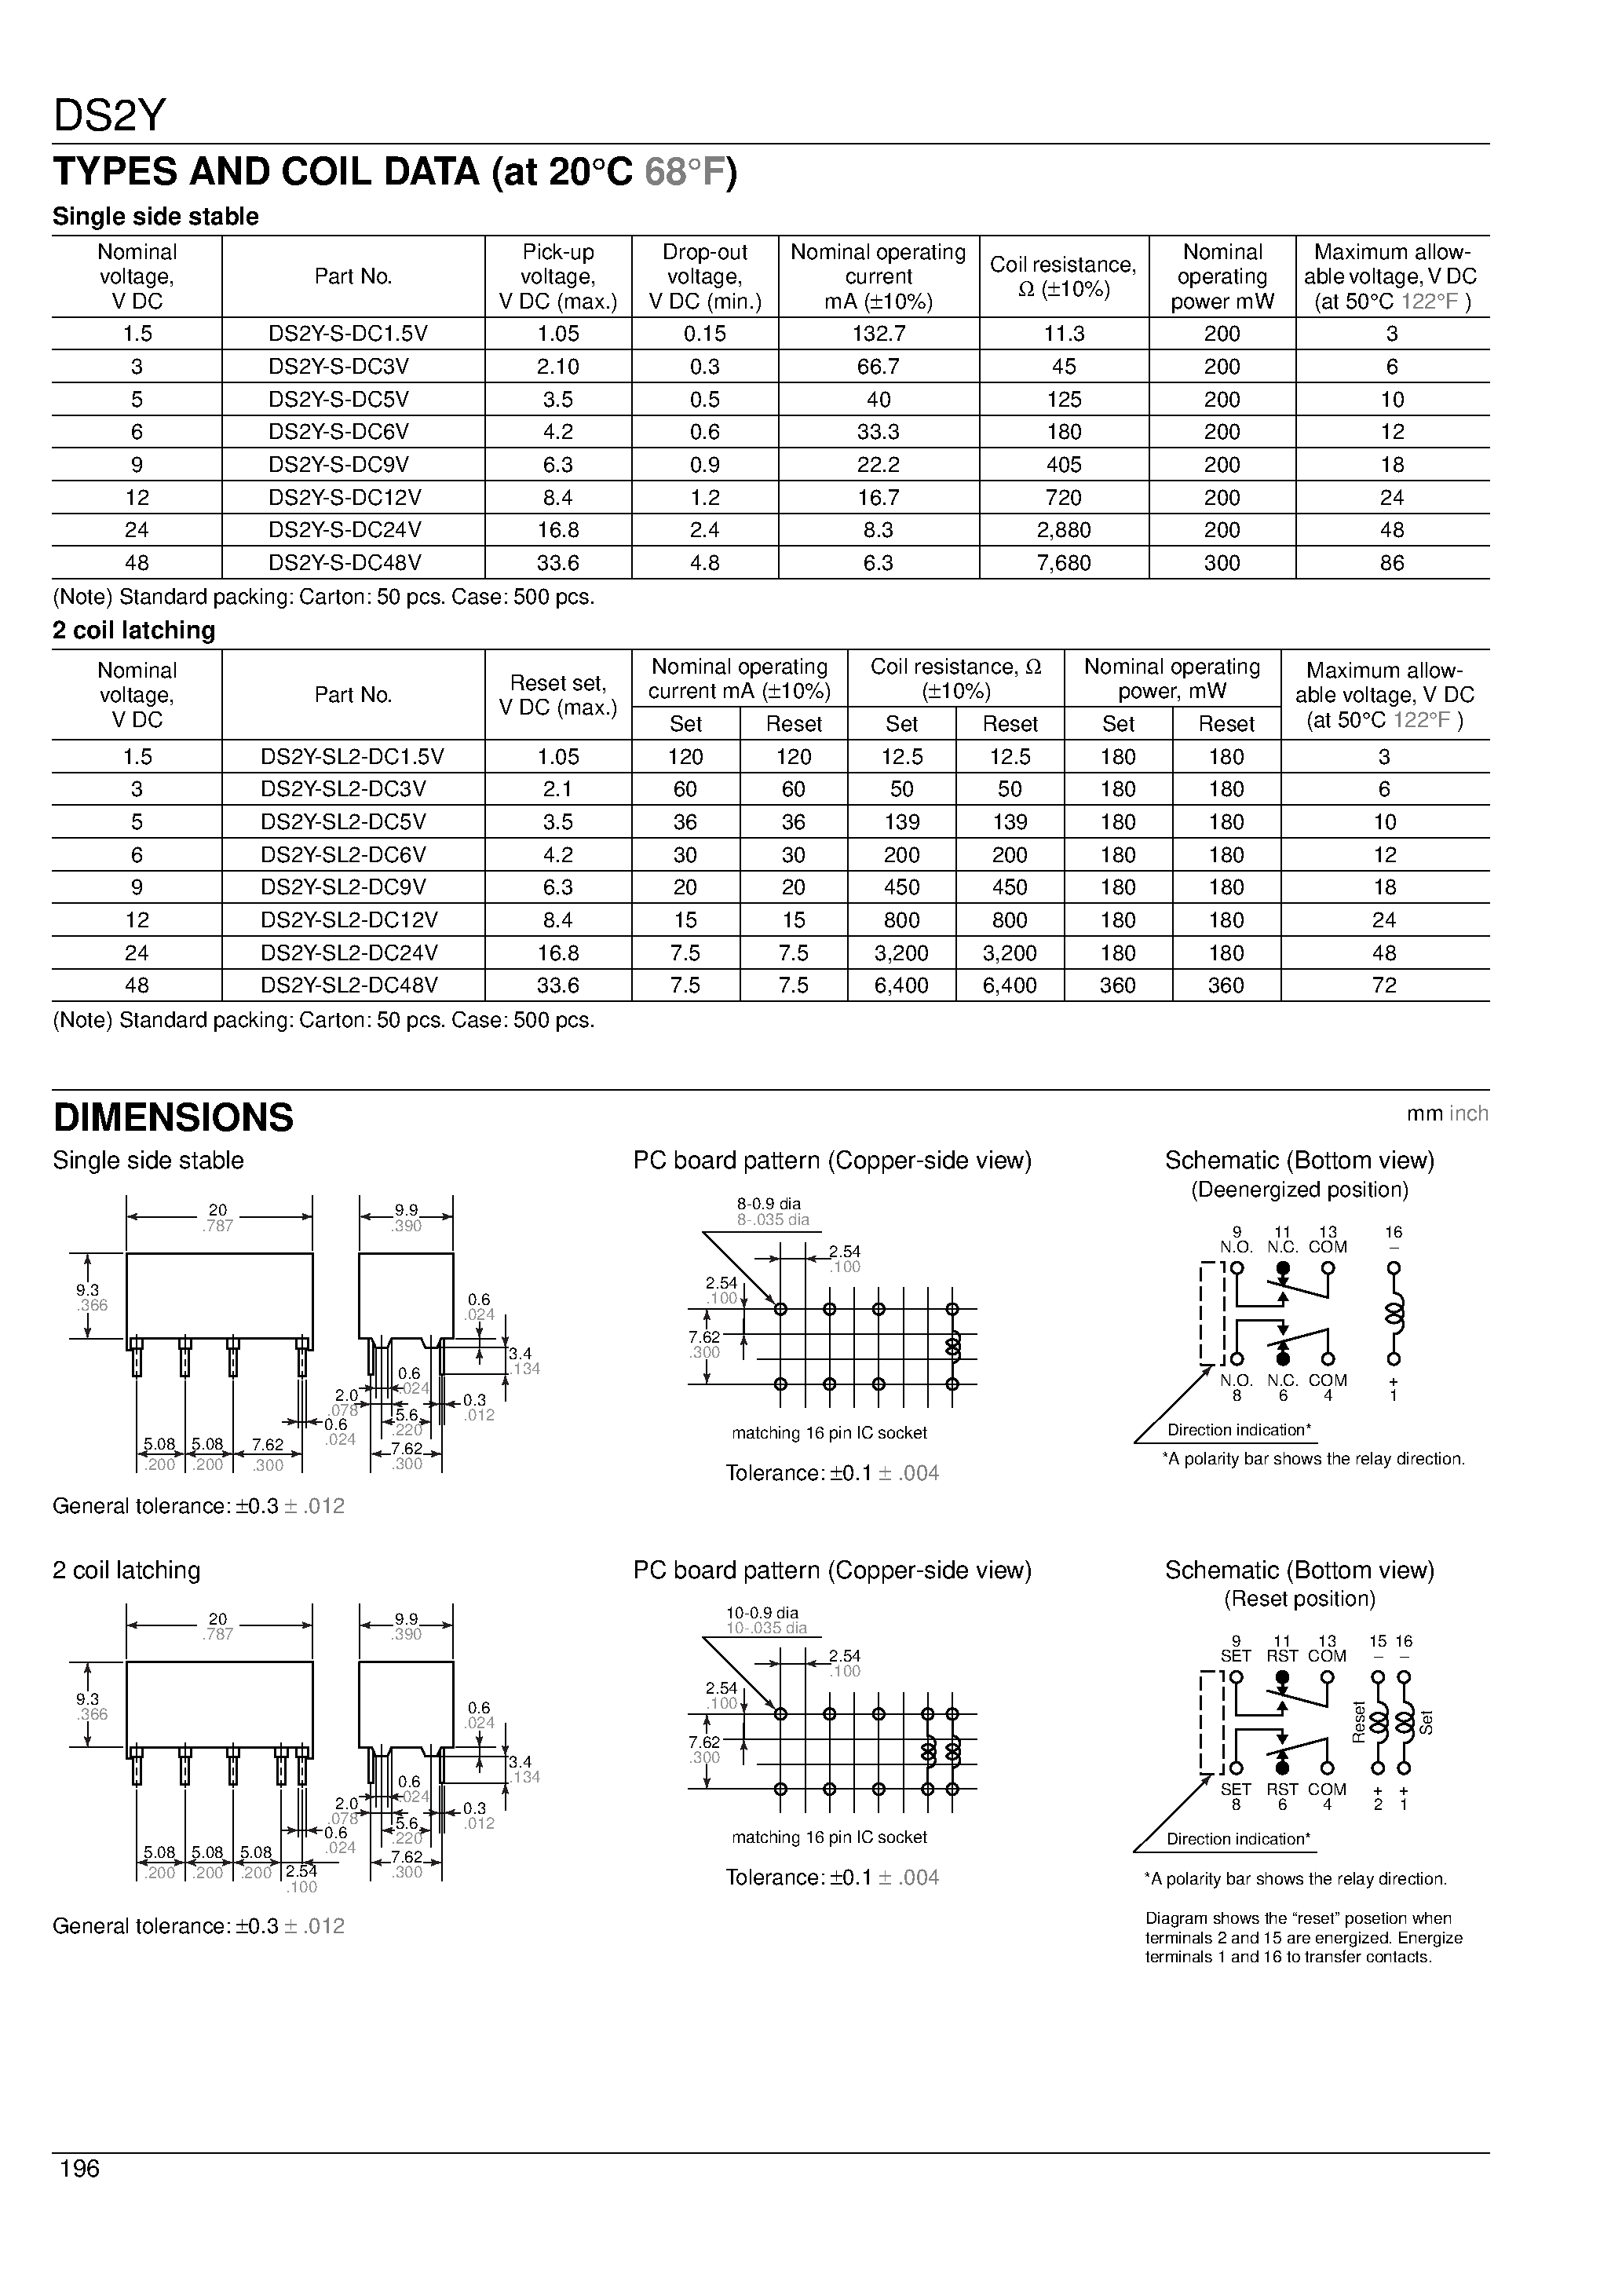 Datasheet DS2Y-SL2-DC24V - 2 Form C contact High sensitivity-200 mW nominal operating power page 2